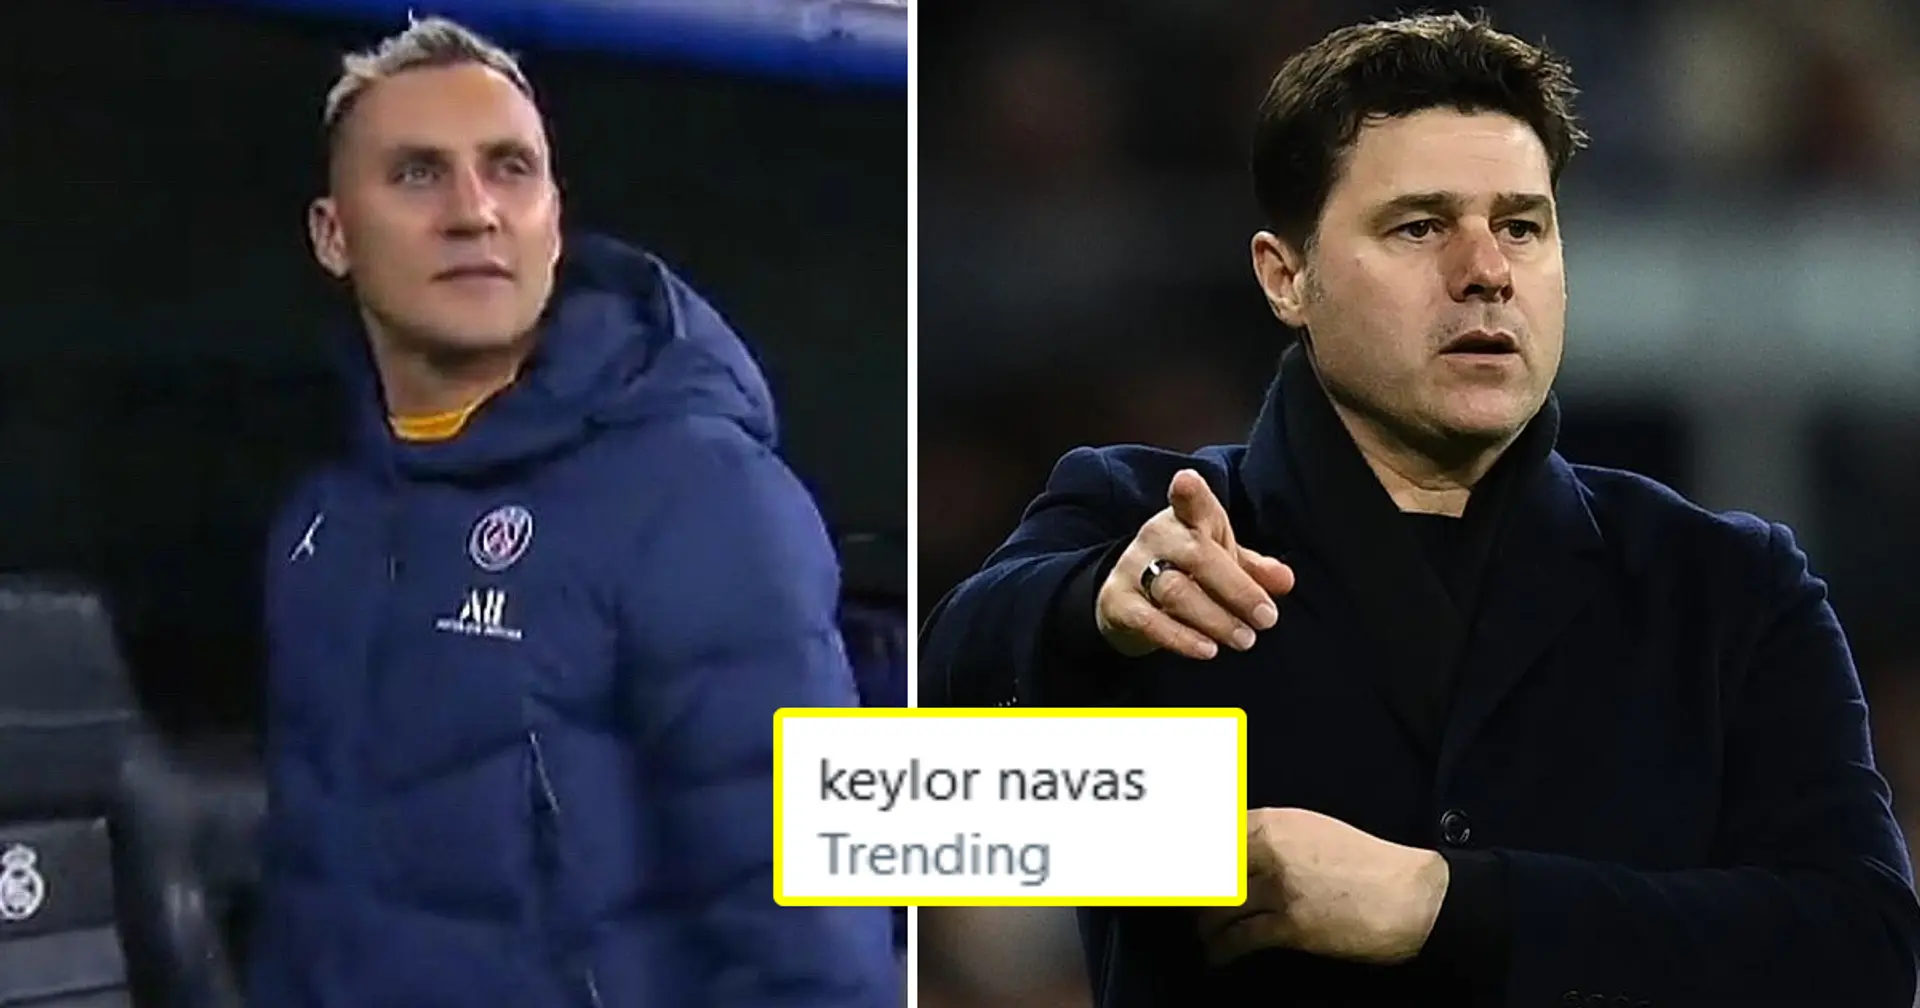 Why is Keylor Navas trending among Champions League fans right now? Explained